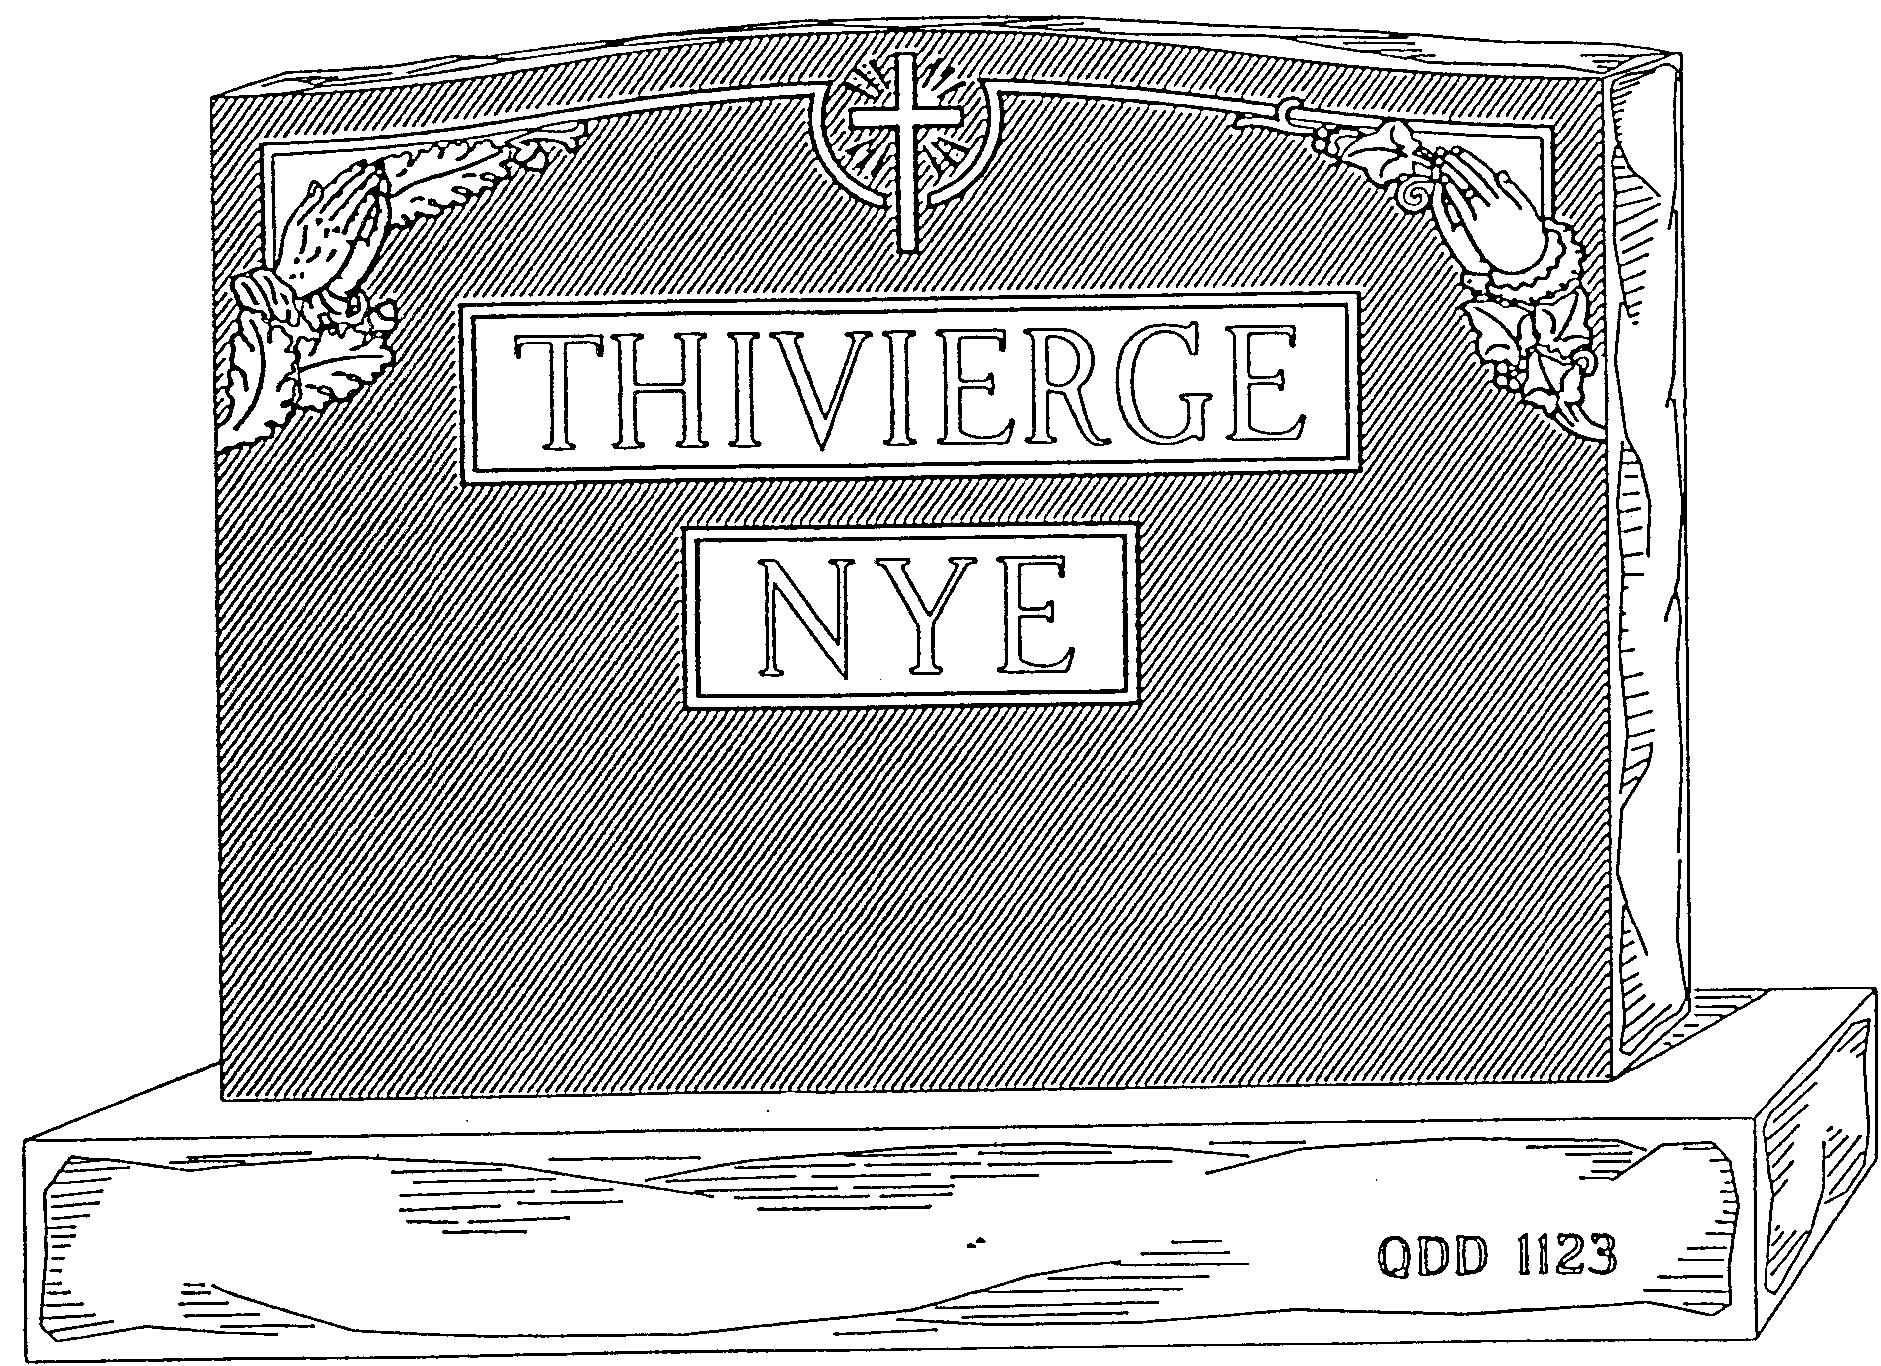 a black and white drawing of a tombstone with the name thvierge nye on it .